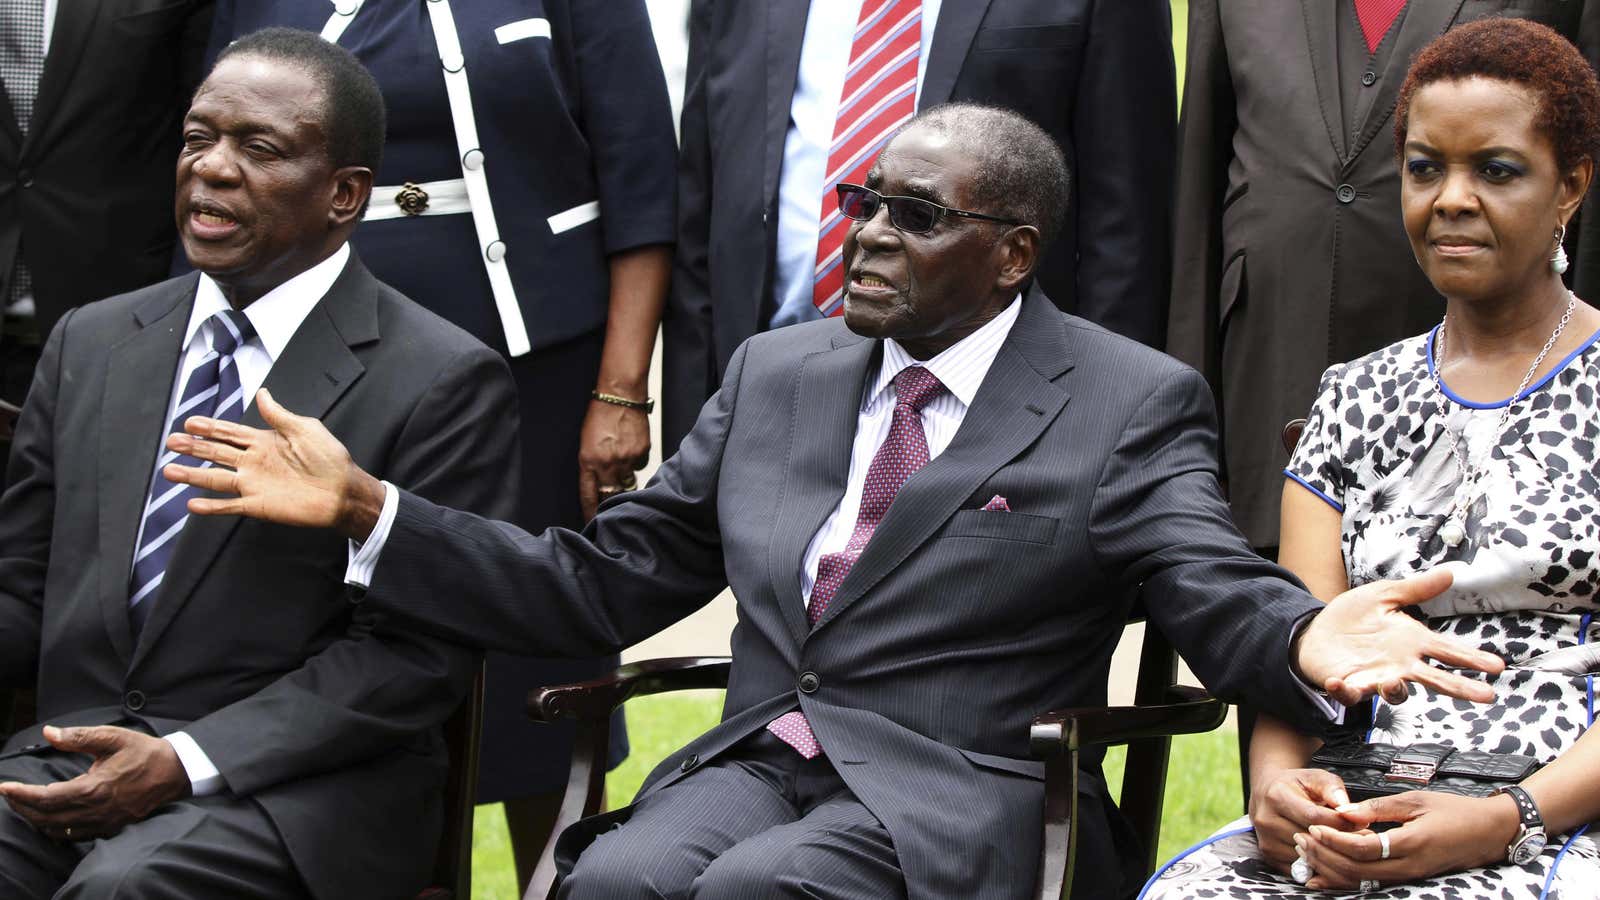 In happier times, perhaps. Zimbabwe’s President Robert Mugabe (C) sits with his wife Grace and Emmerson Mnangagwa (L).